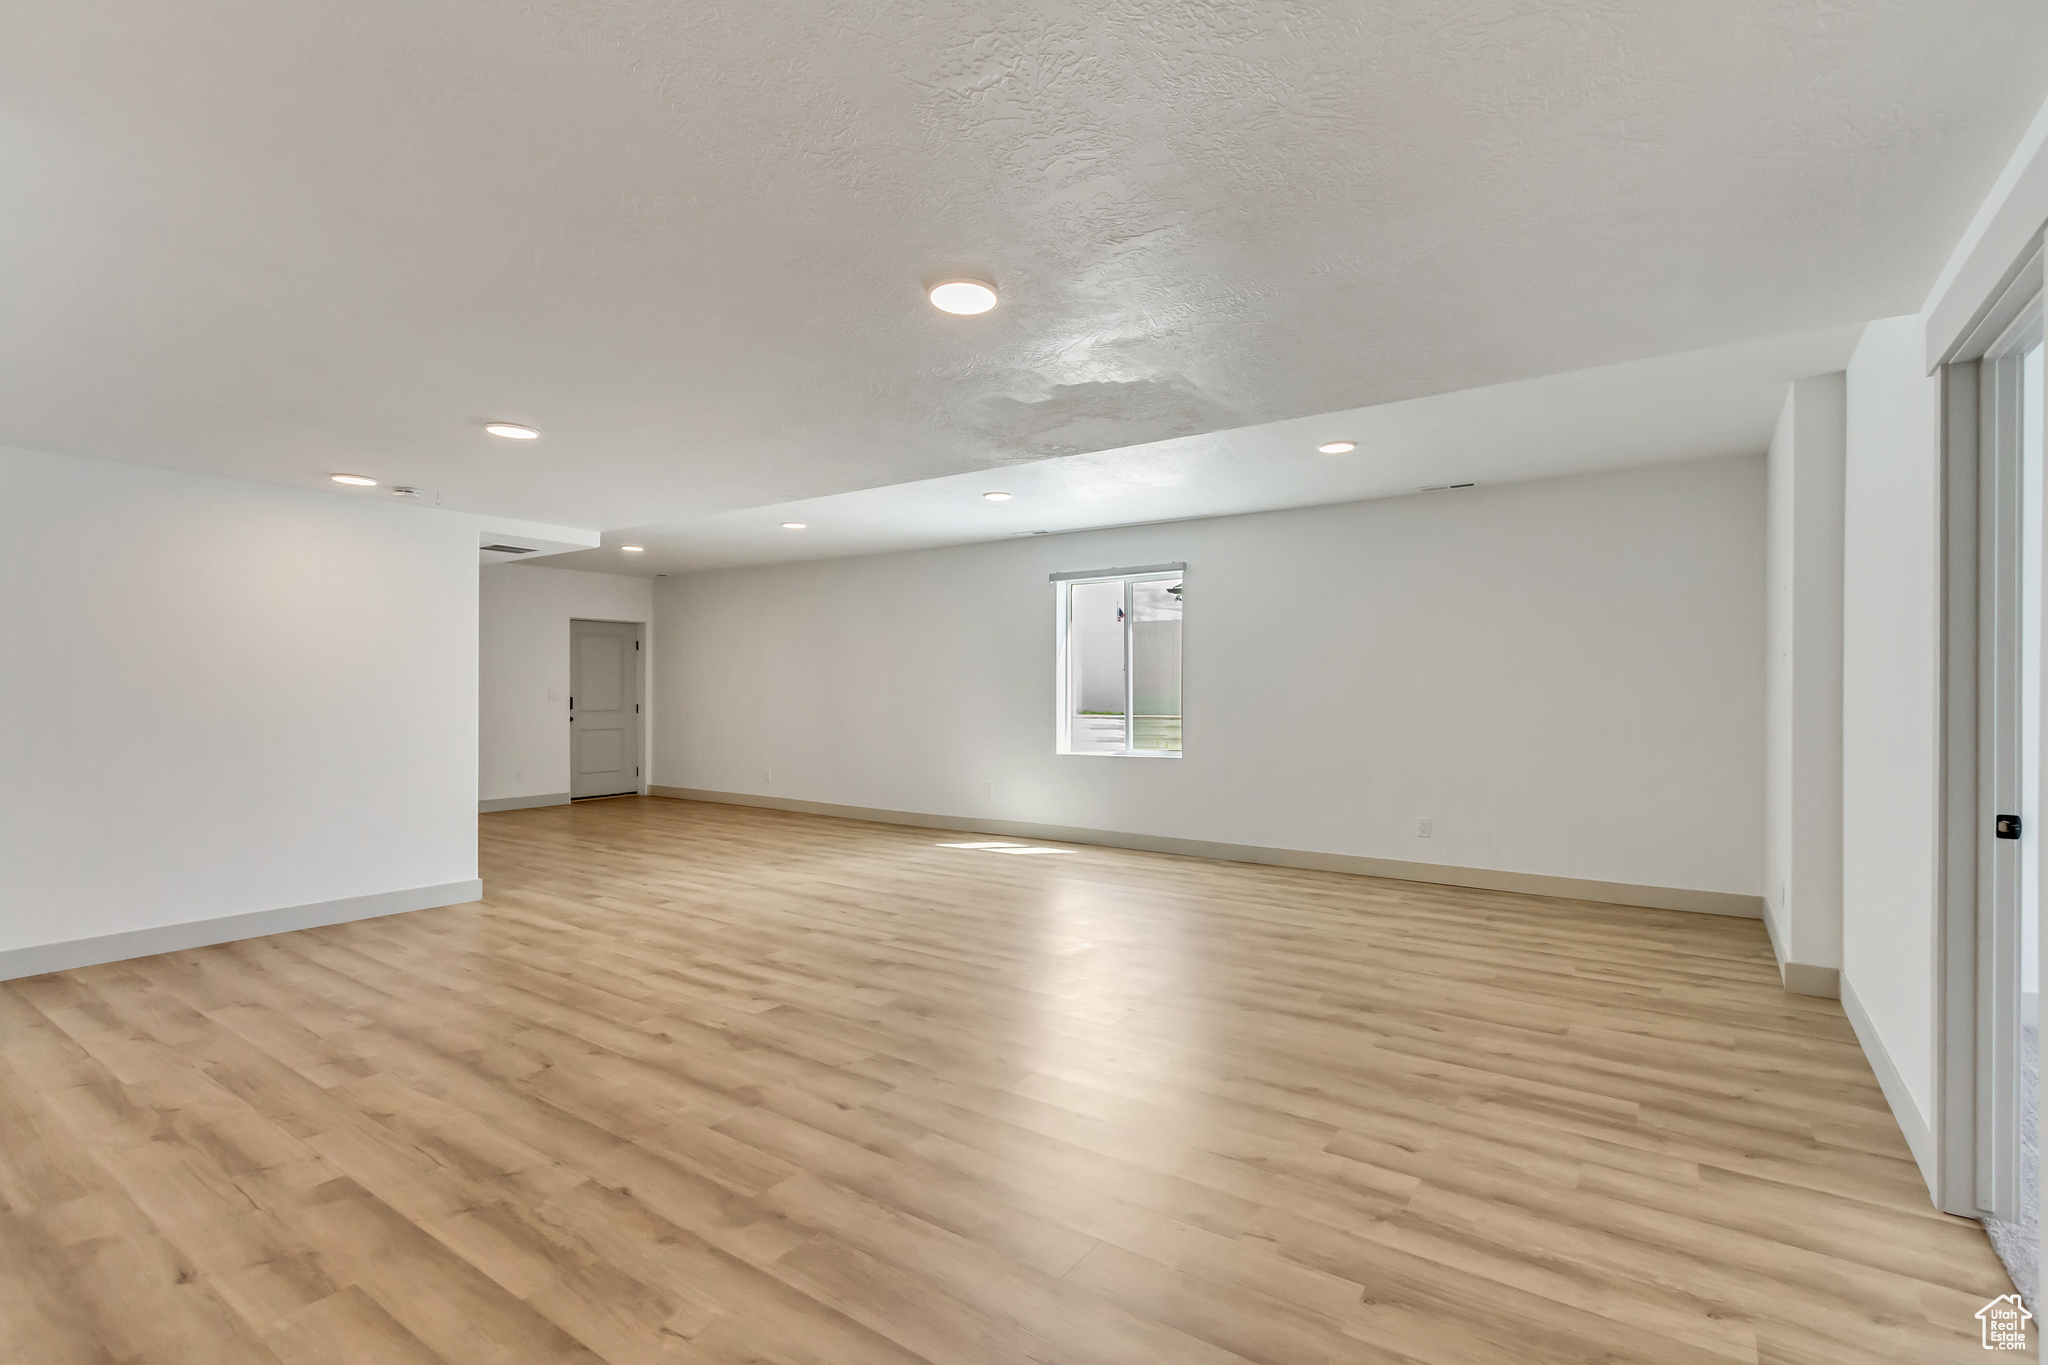 Unfurnished room featuring light wood-type flooring and a textured ceiling